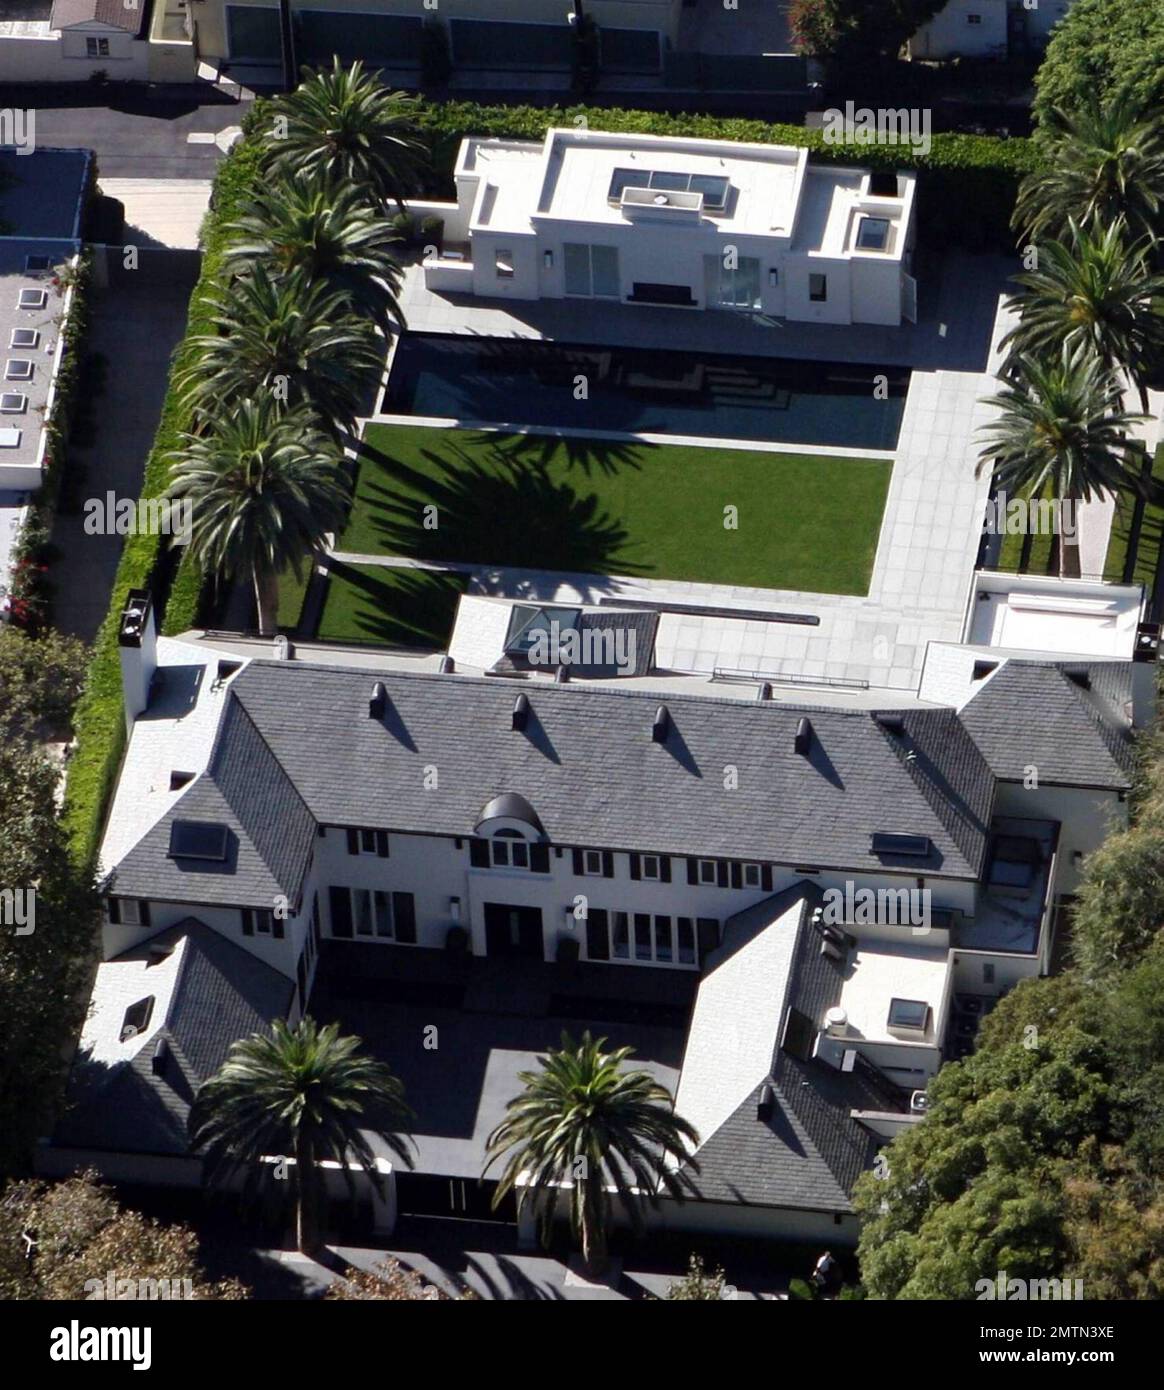 EXCLUSIVE!! It looks as though Simon Cowell has finally completed his dream  home. The project has been ongoing since he purchased the property for $8  million in September 2004. Originally a six-bedroom